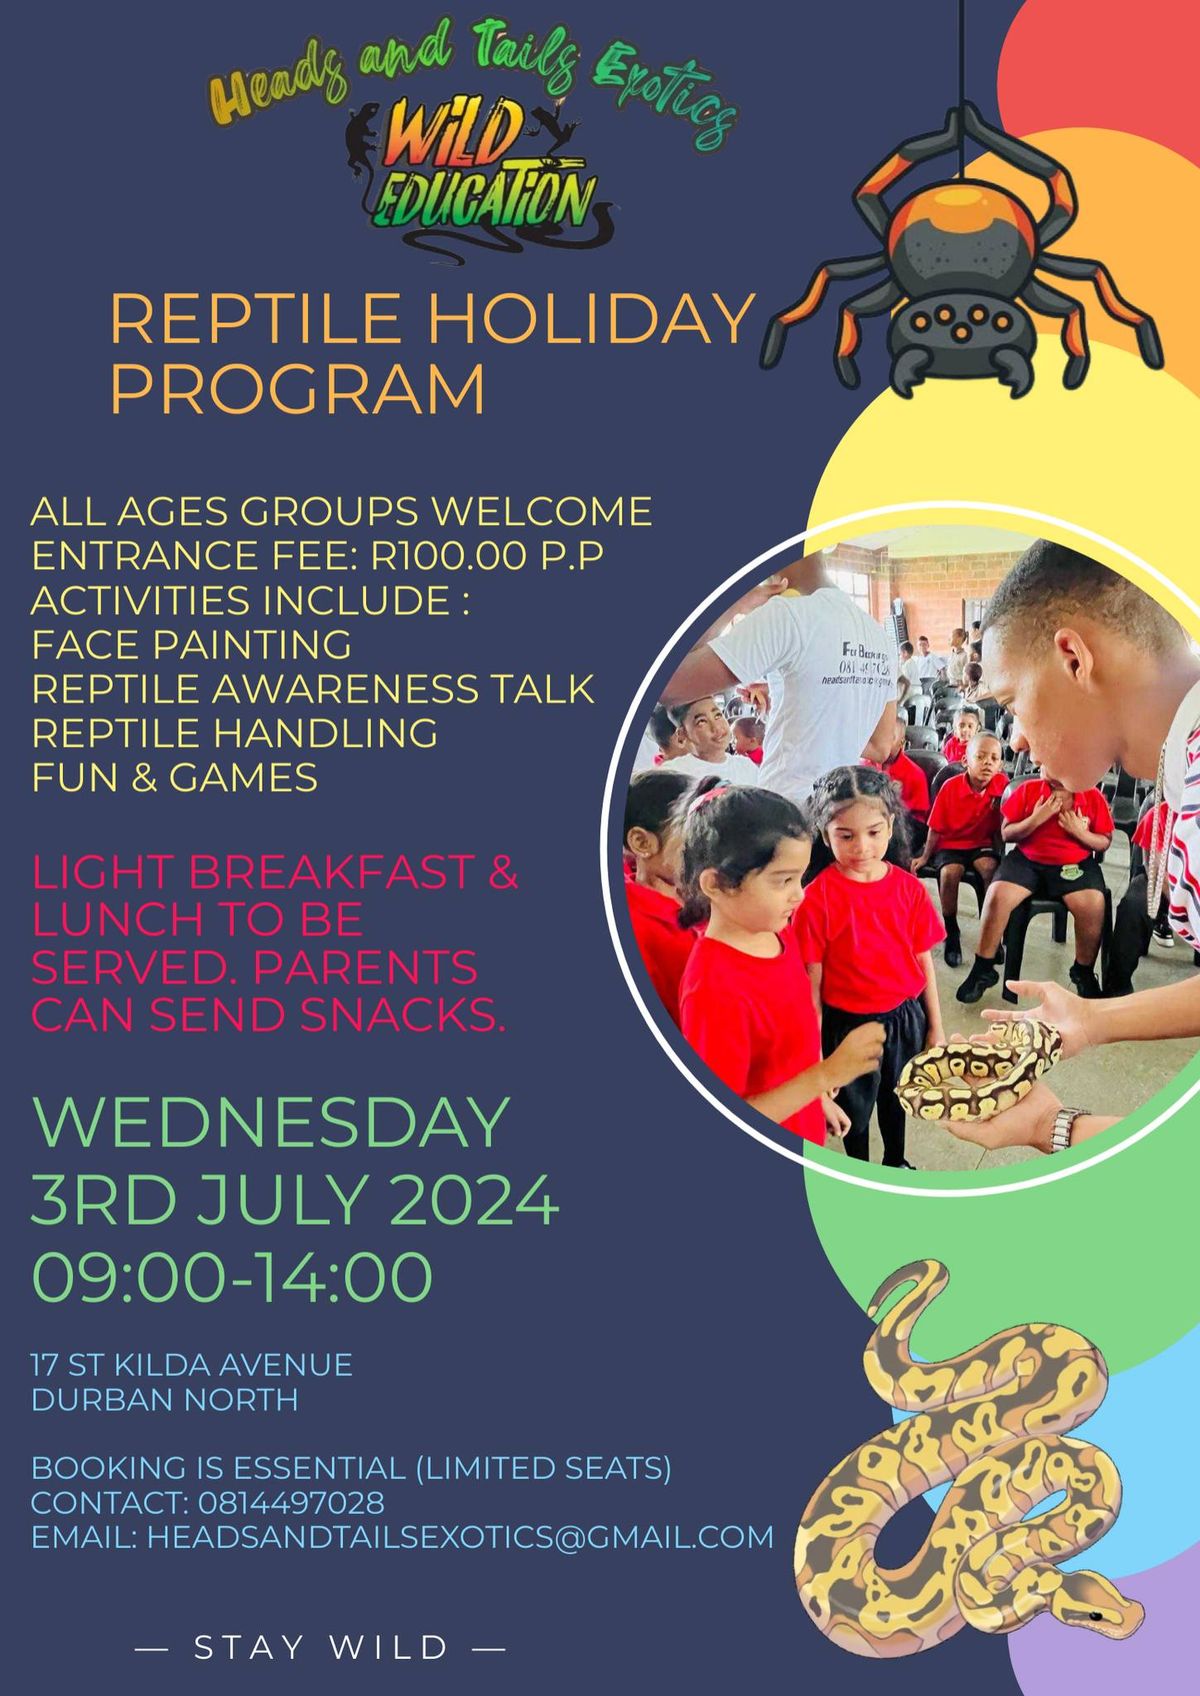 Exciting Reptile Holiday Program